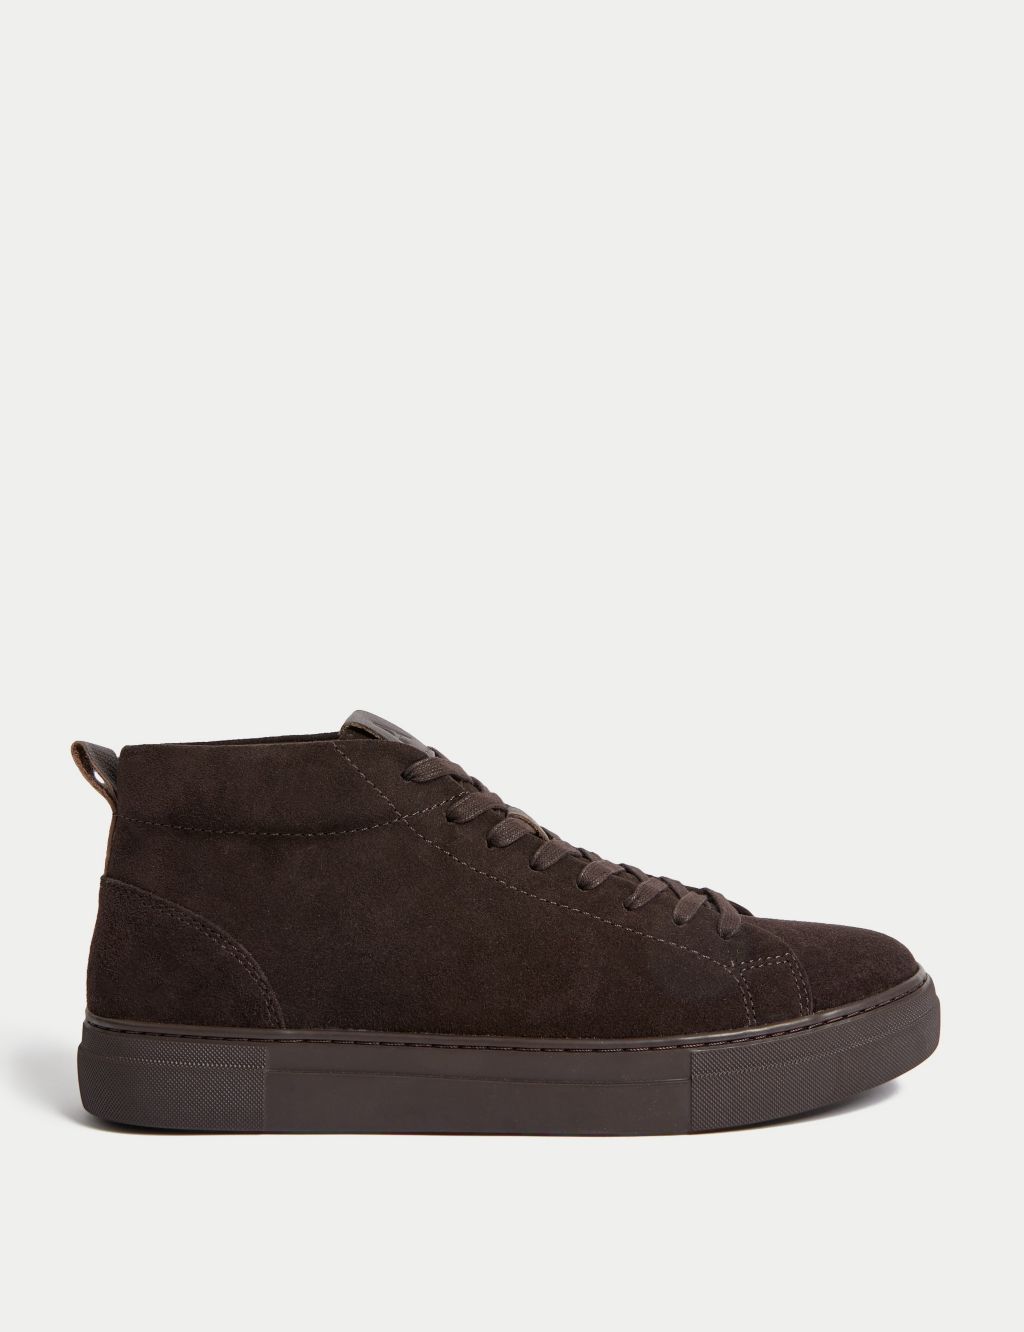 Suede High Top Trainers image 1